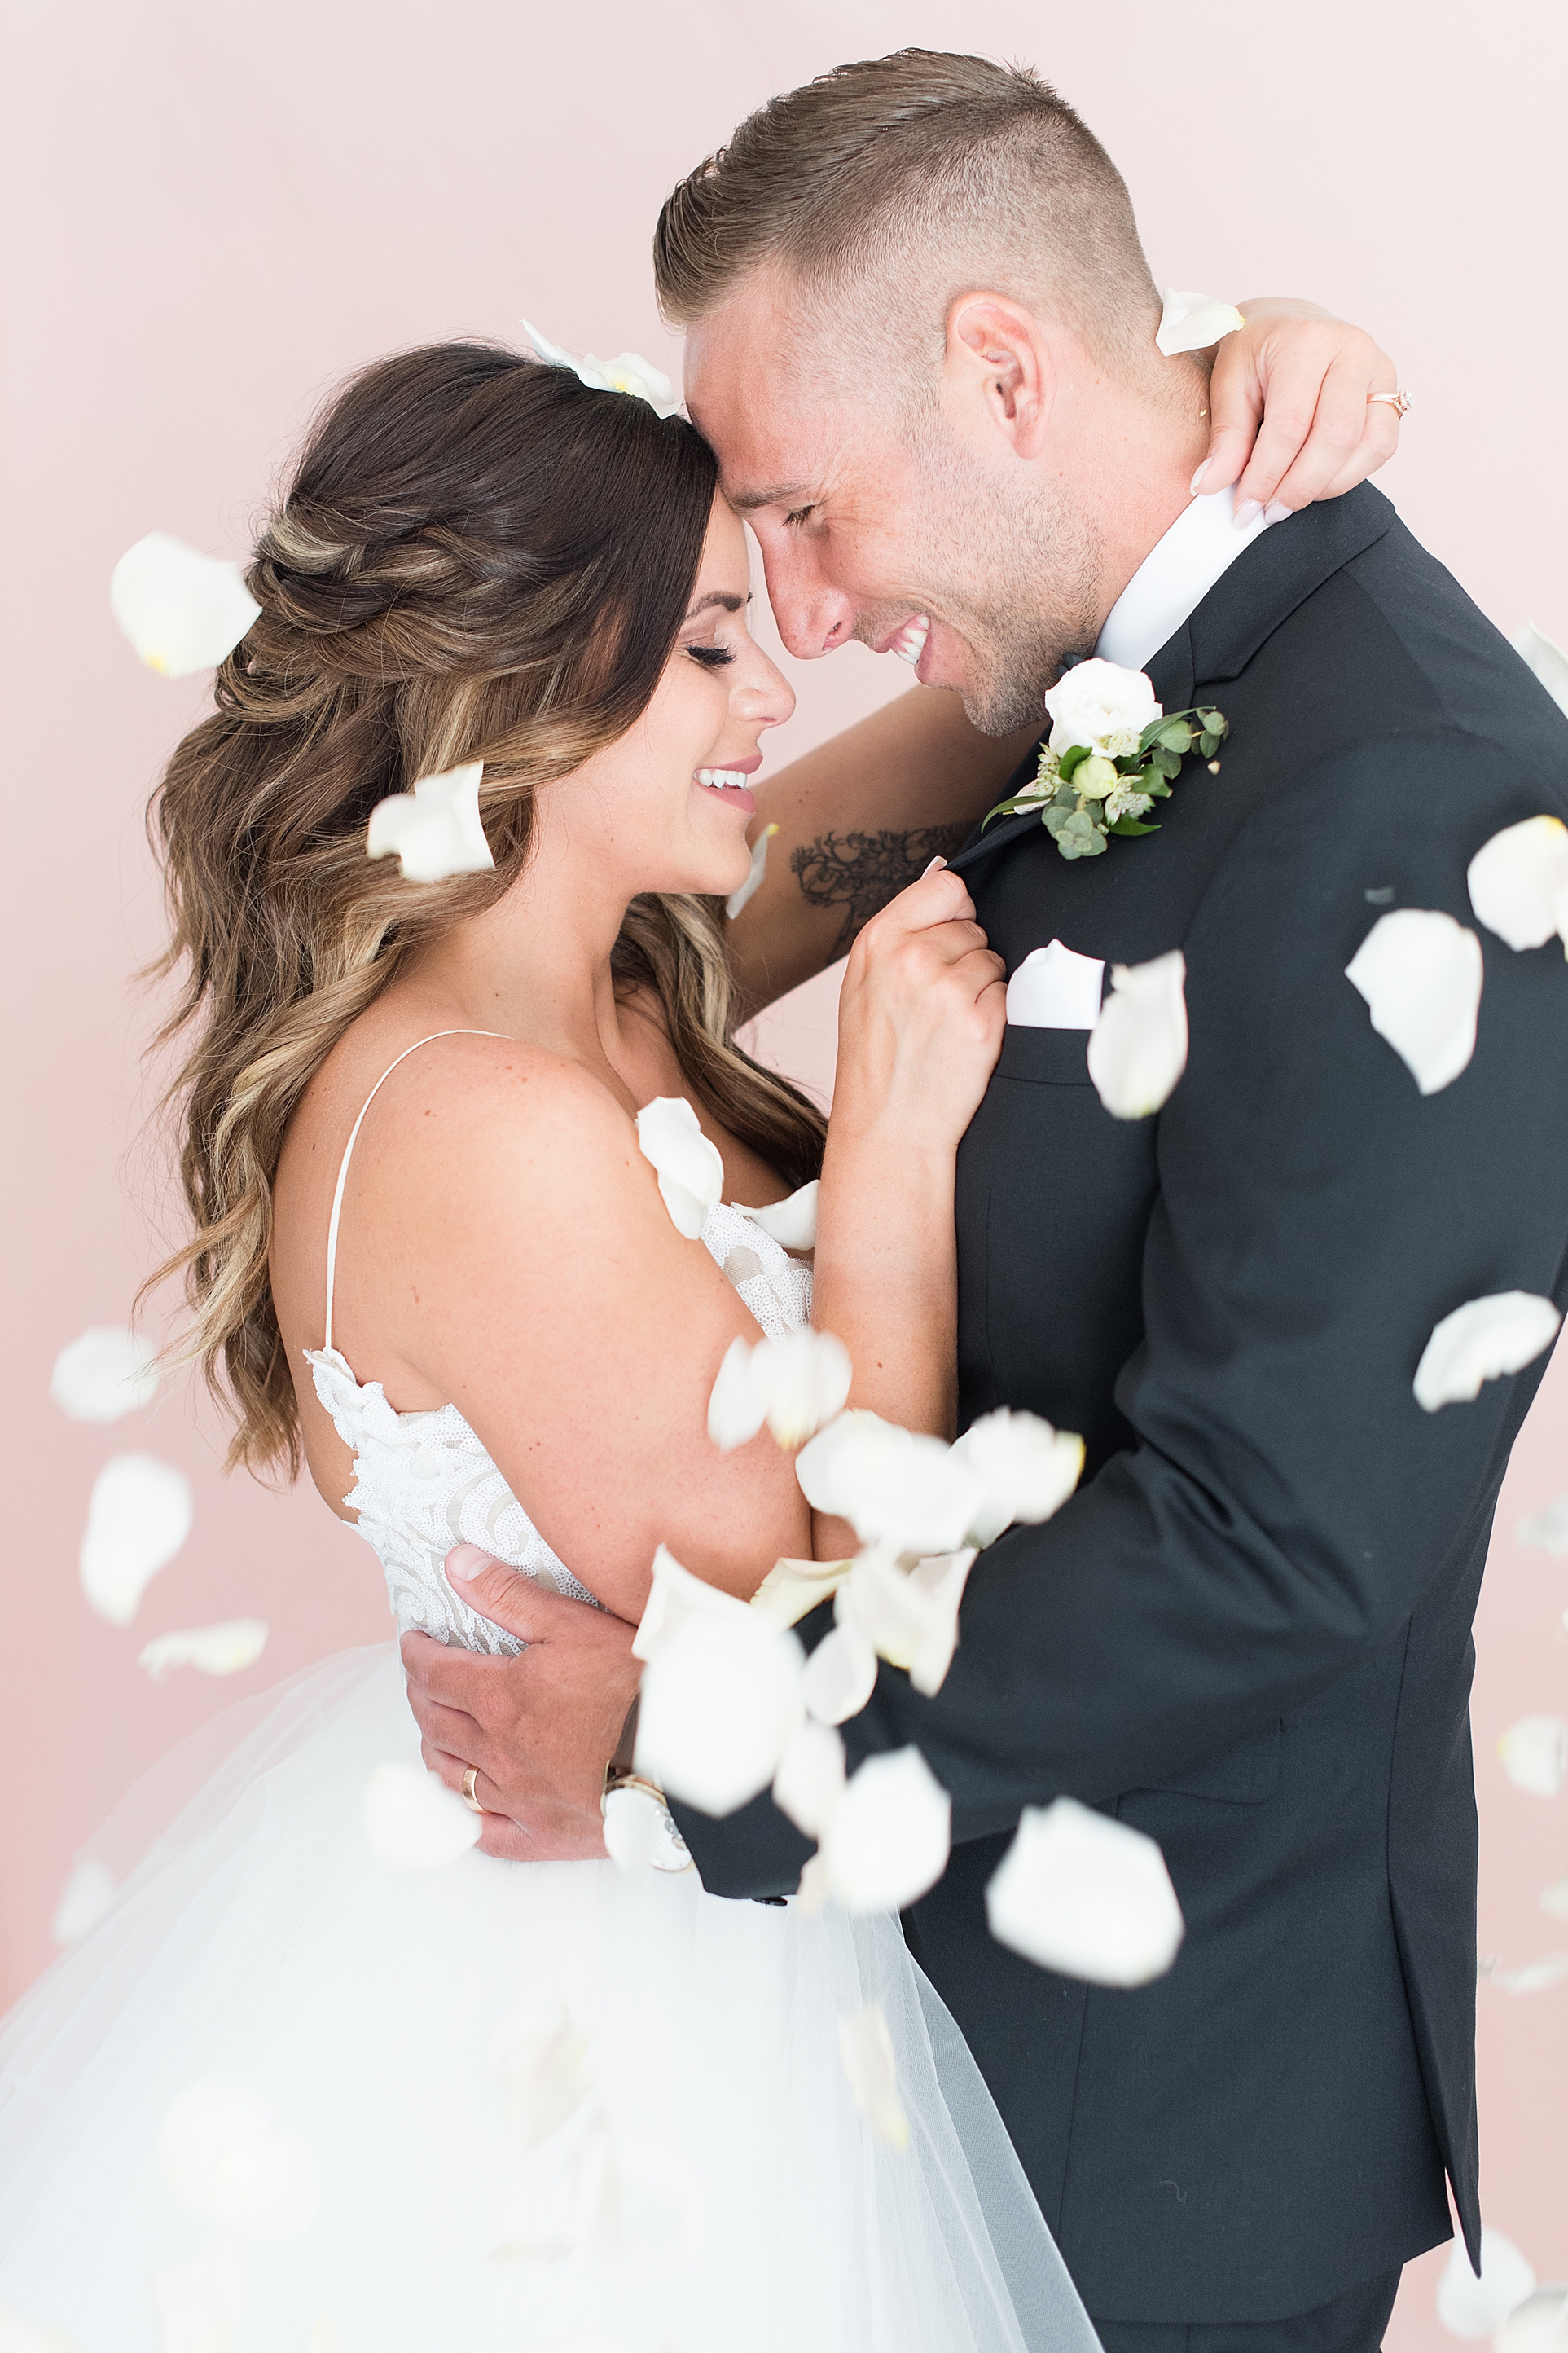 Bride and groom touch foreheads while white rose petals fall around them